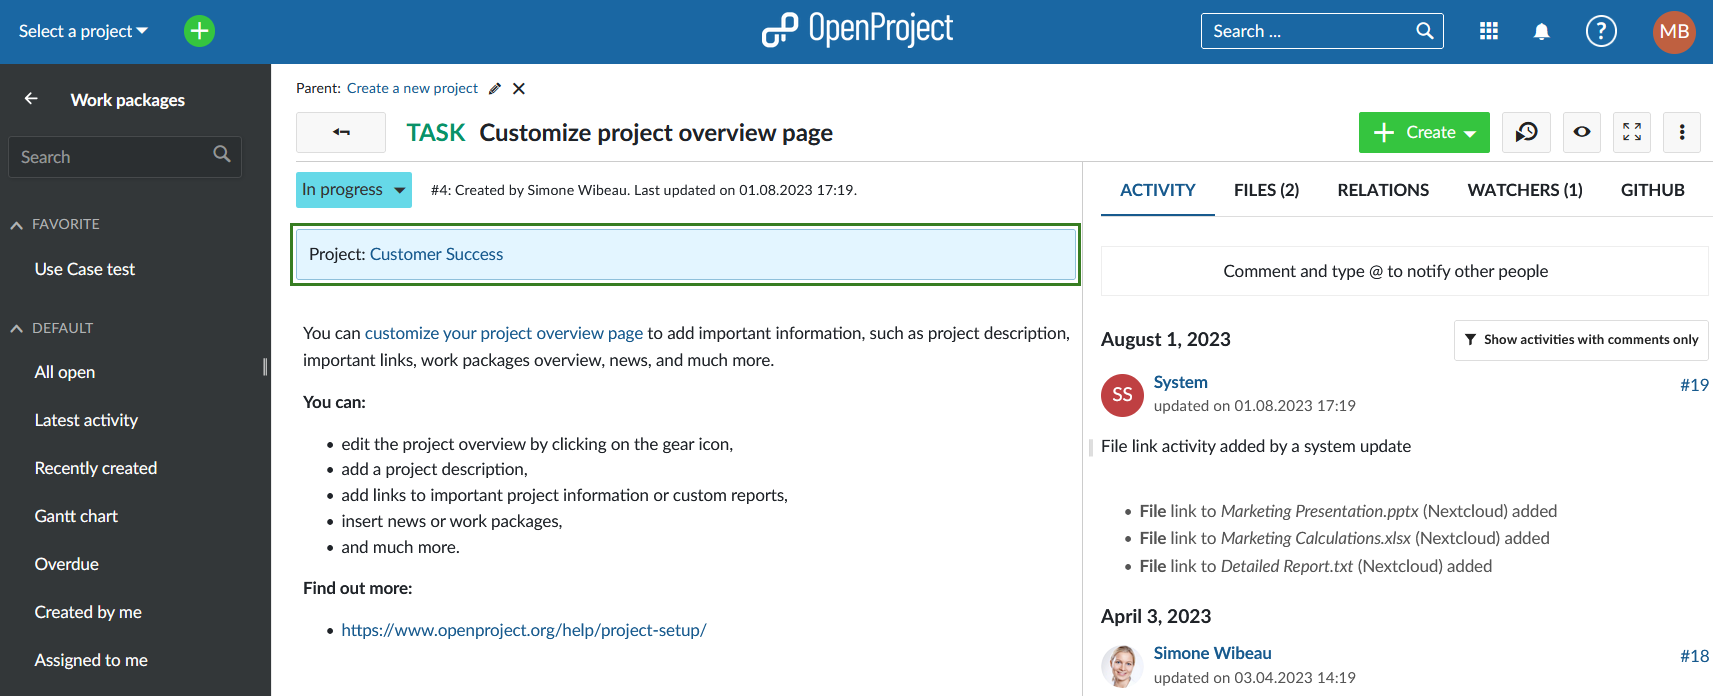 The project containing the current work package is highligted when opening it from outside the project